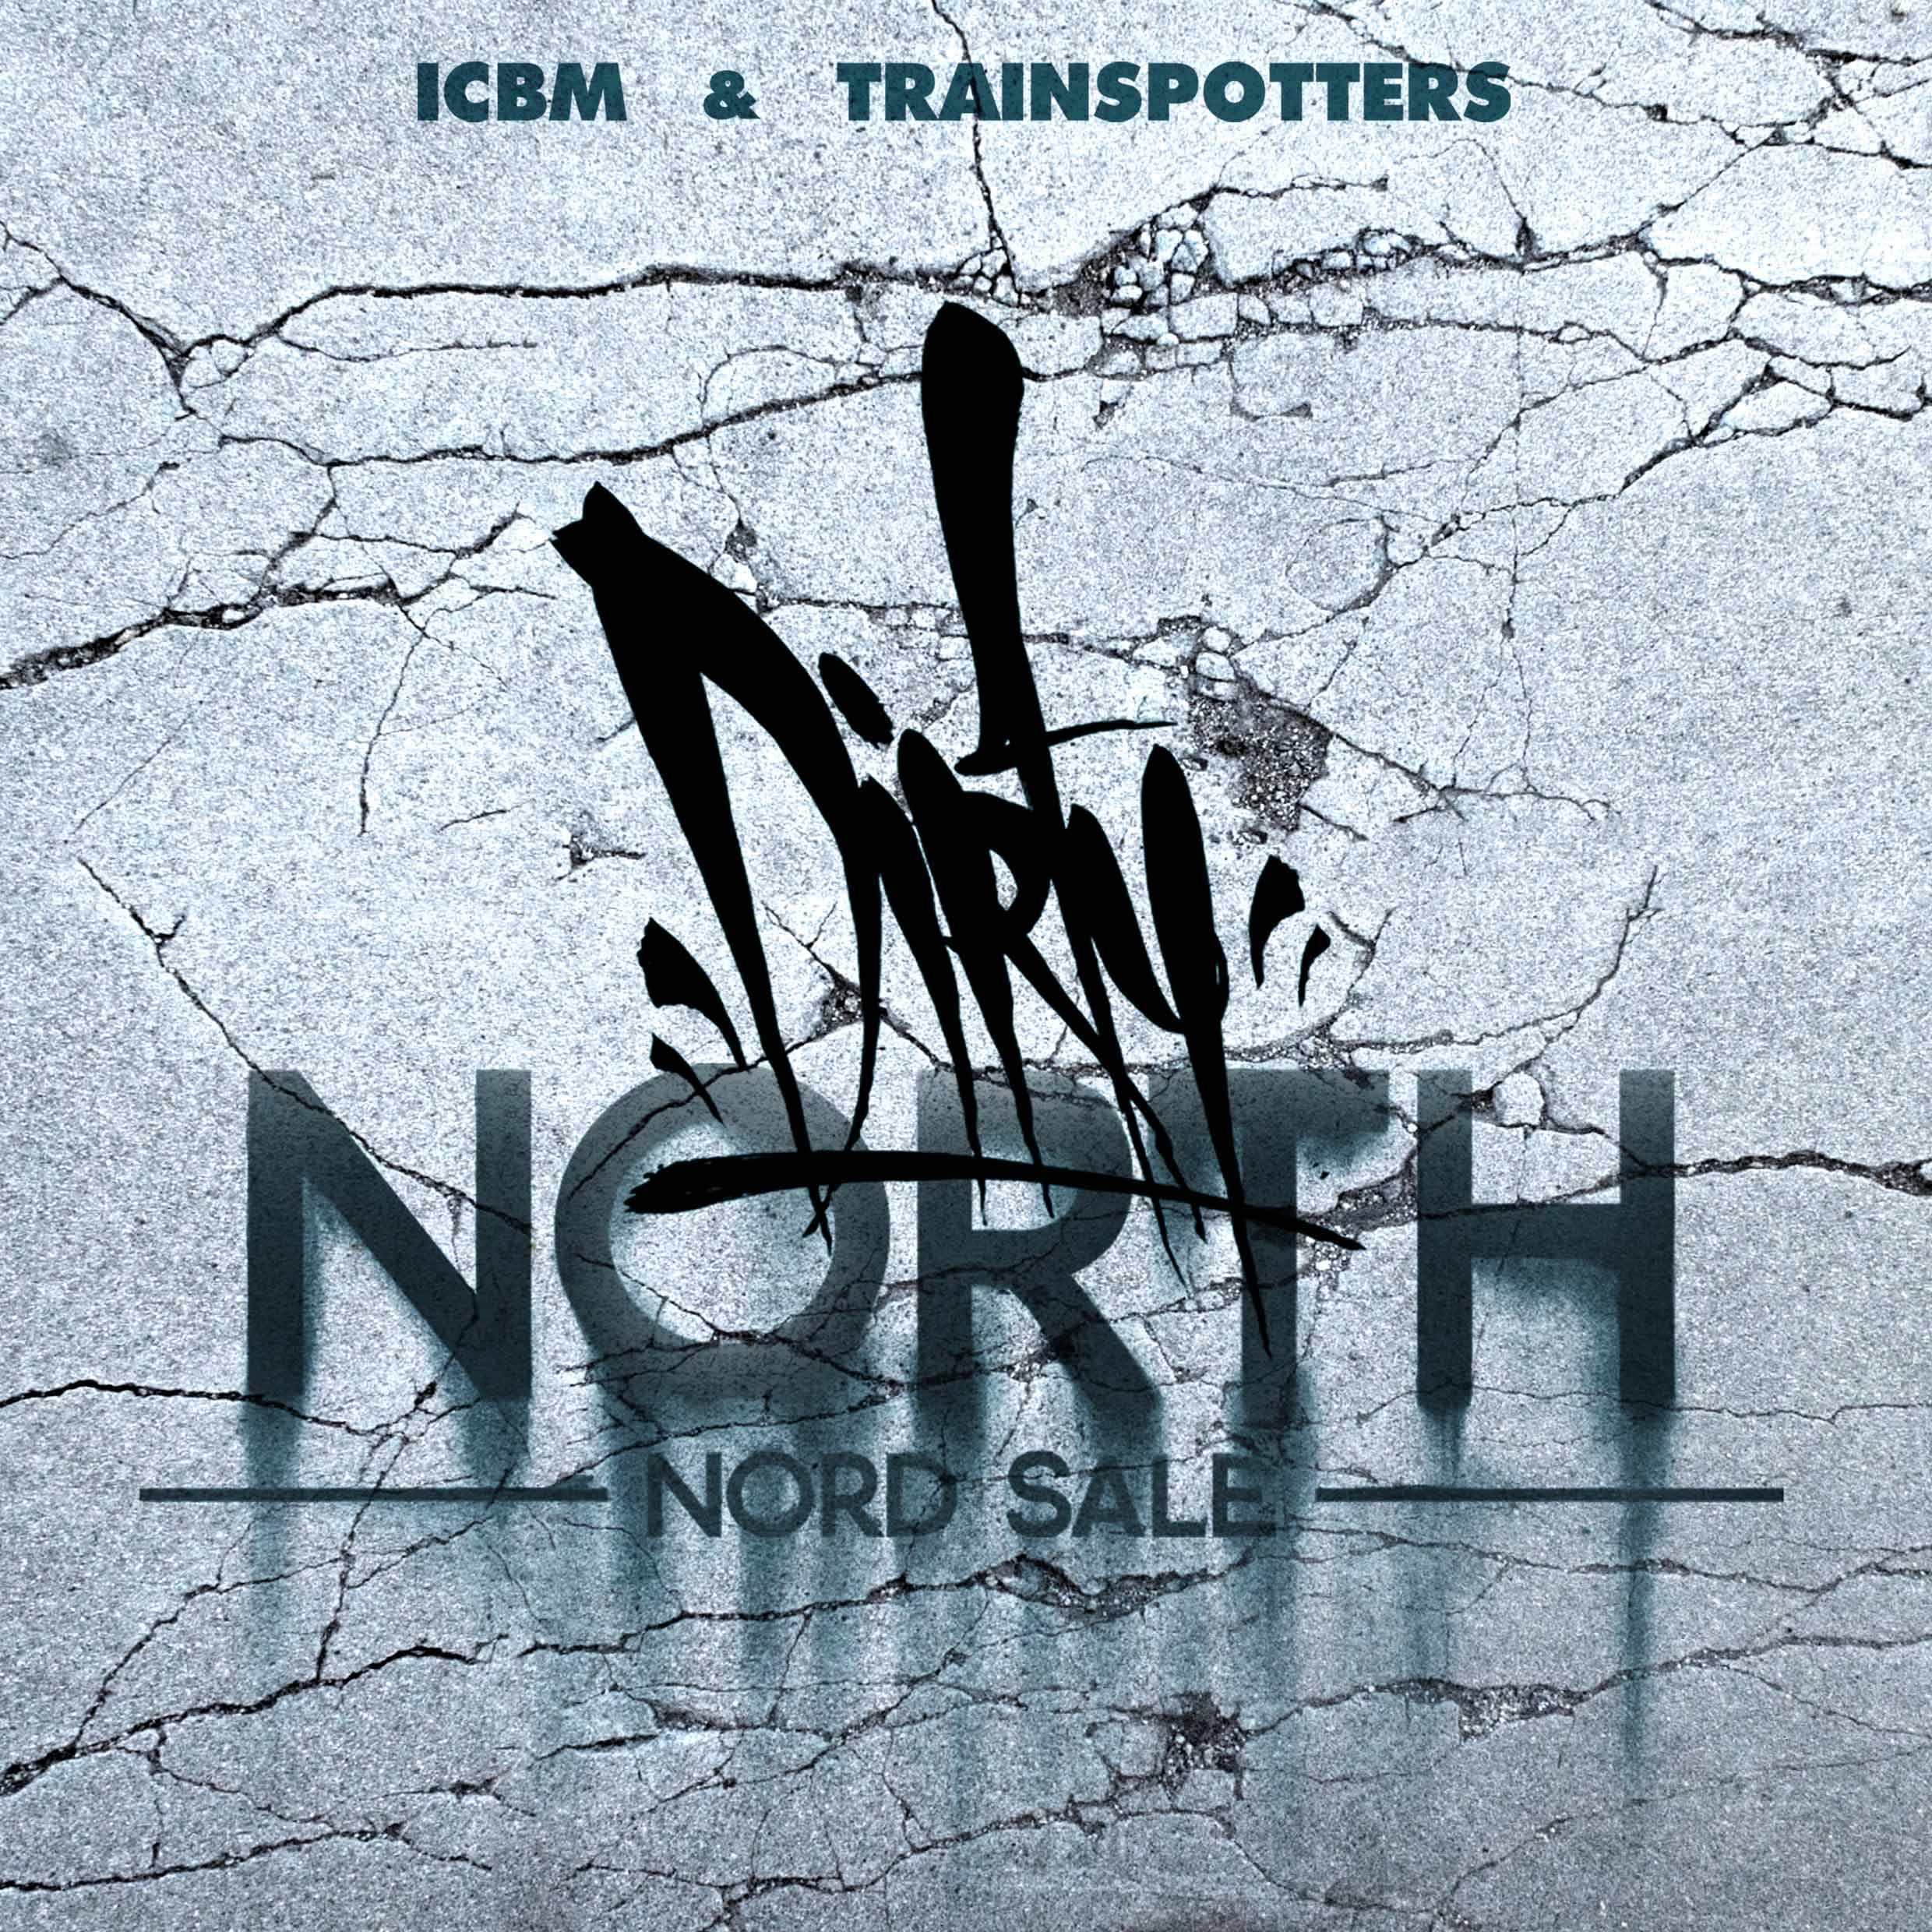 Video: ICBM & Trainspotters – Nord Sale (Trailer)